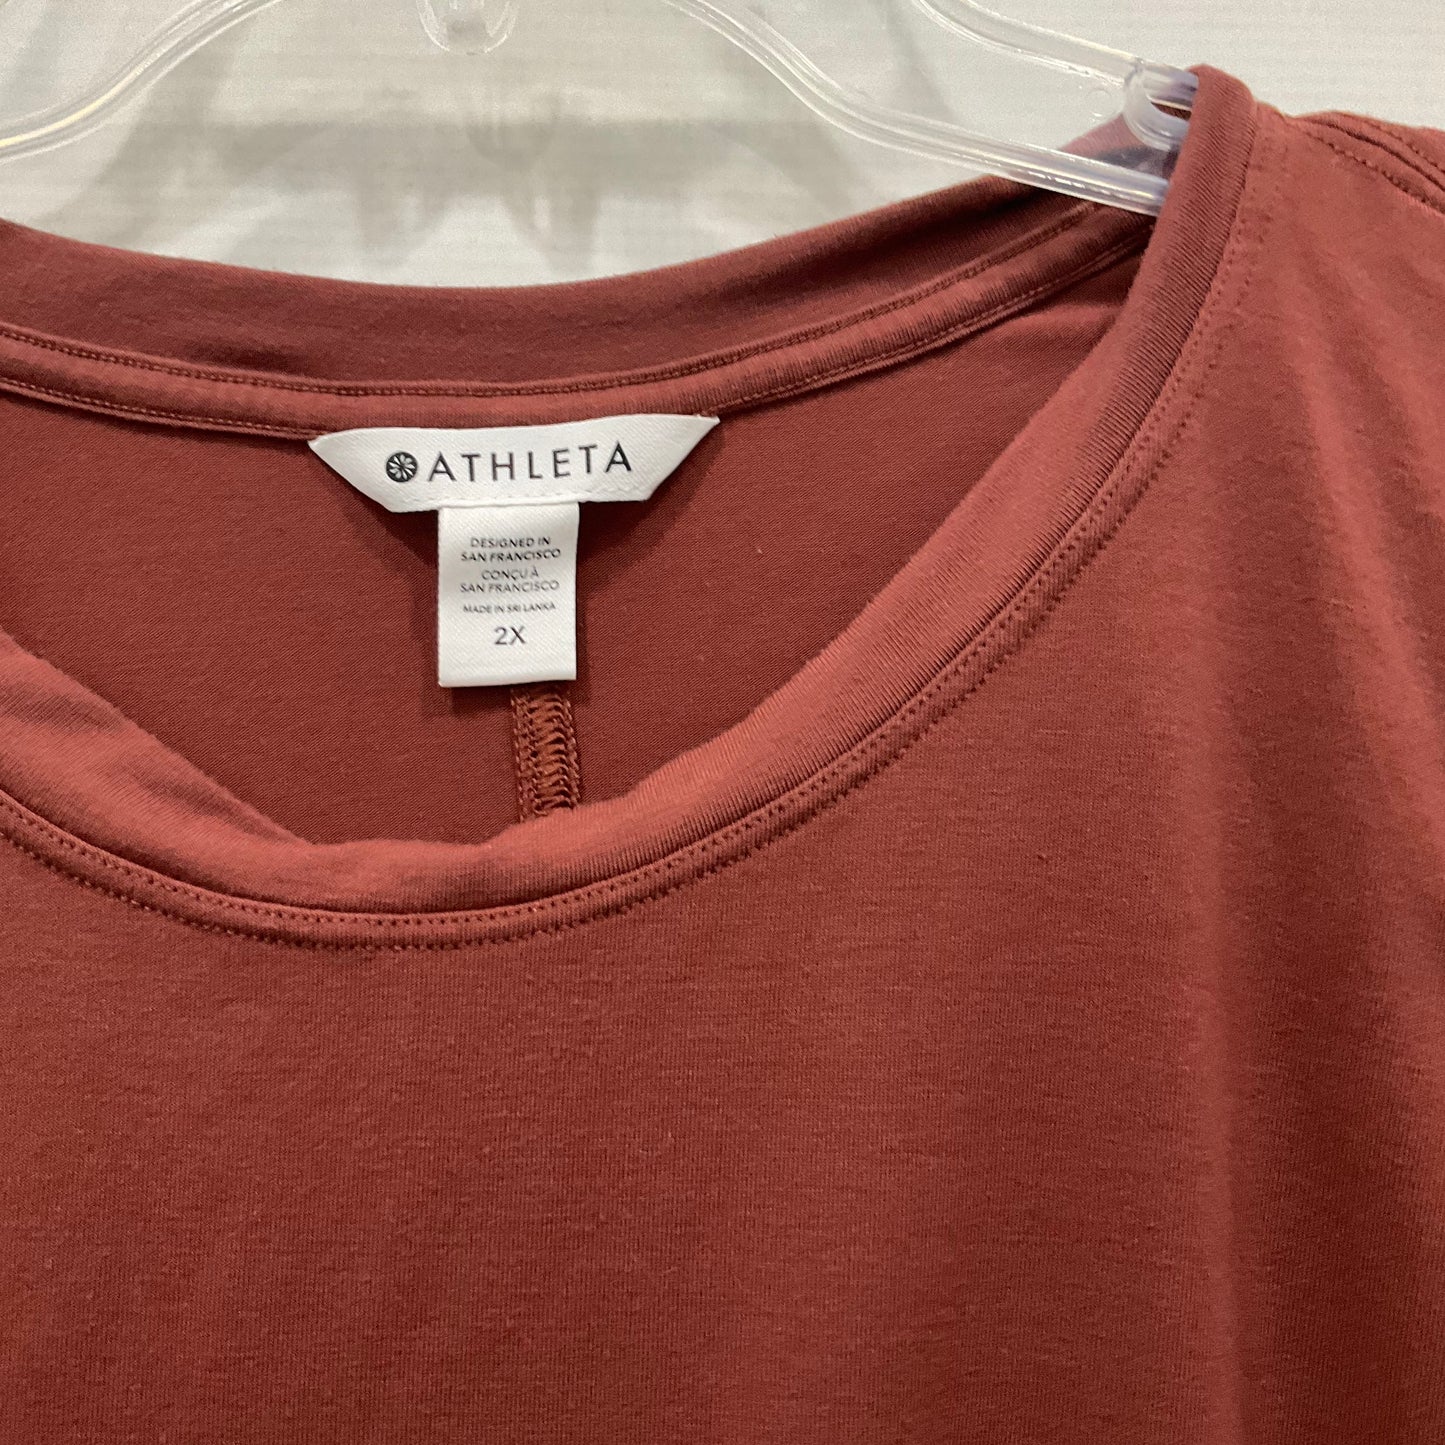 Red Top Short Sleeve Athleta, Size 2x